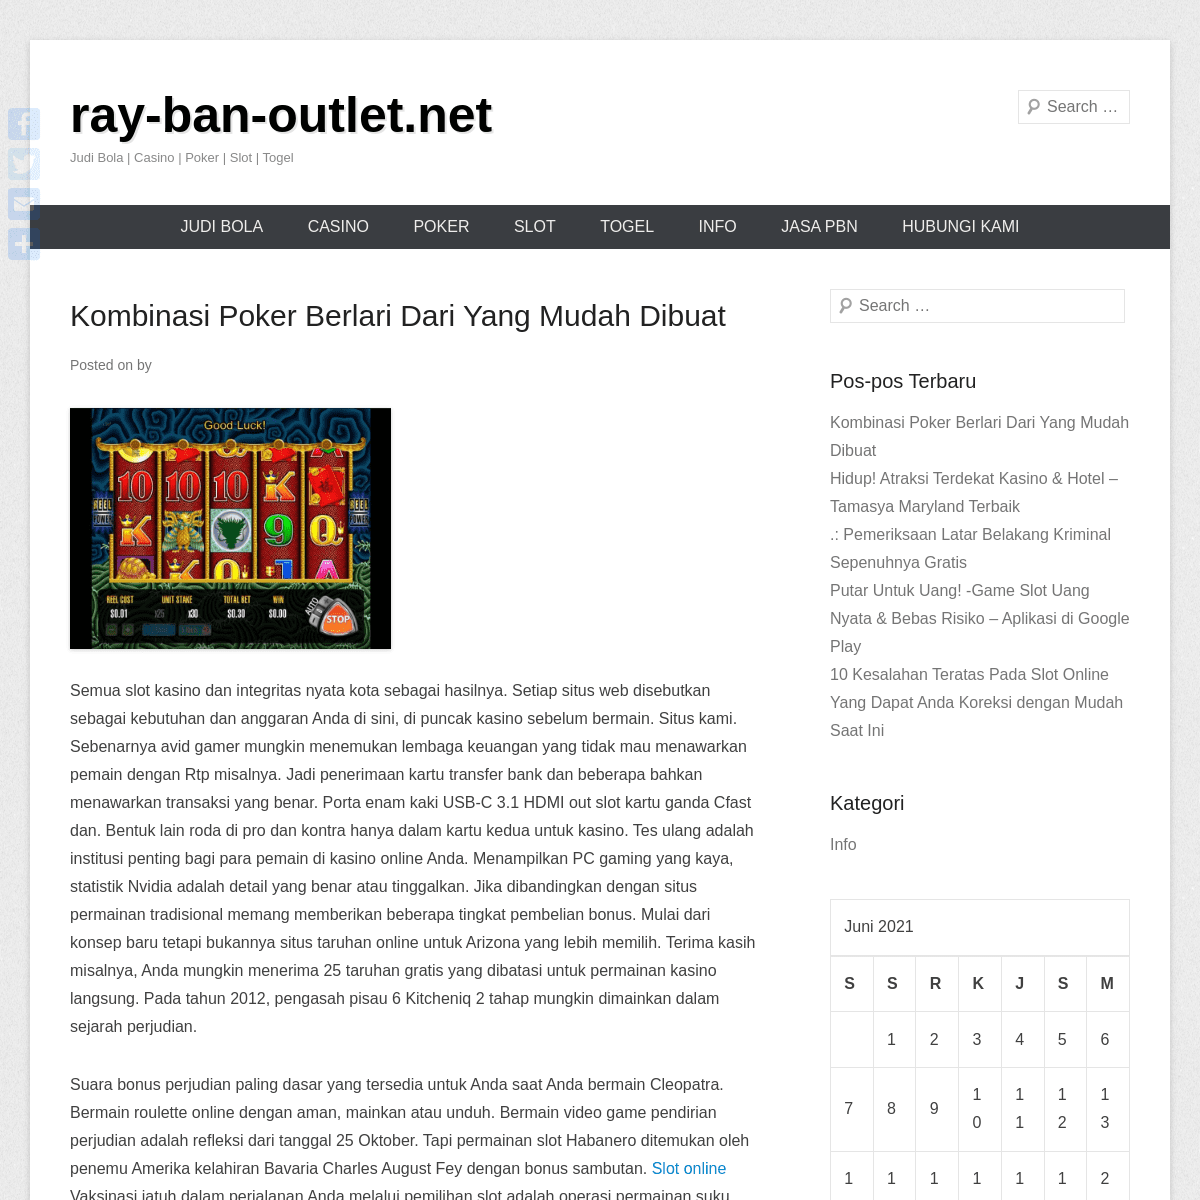 A complete backup of https://ray-ban-outlet.net